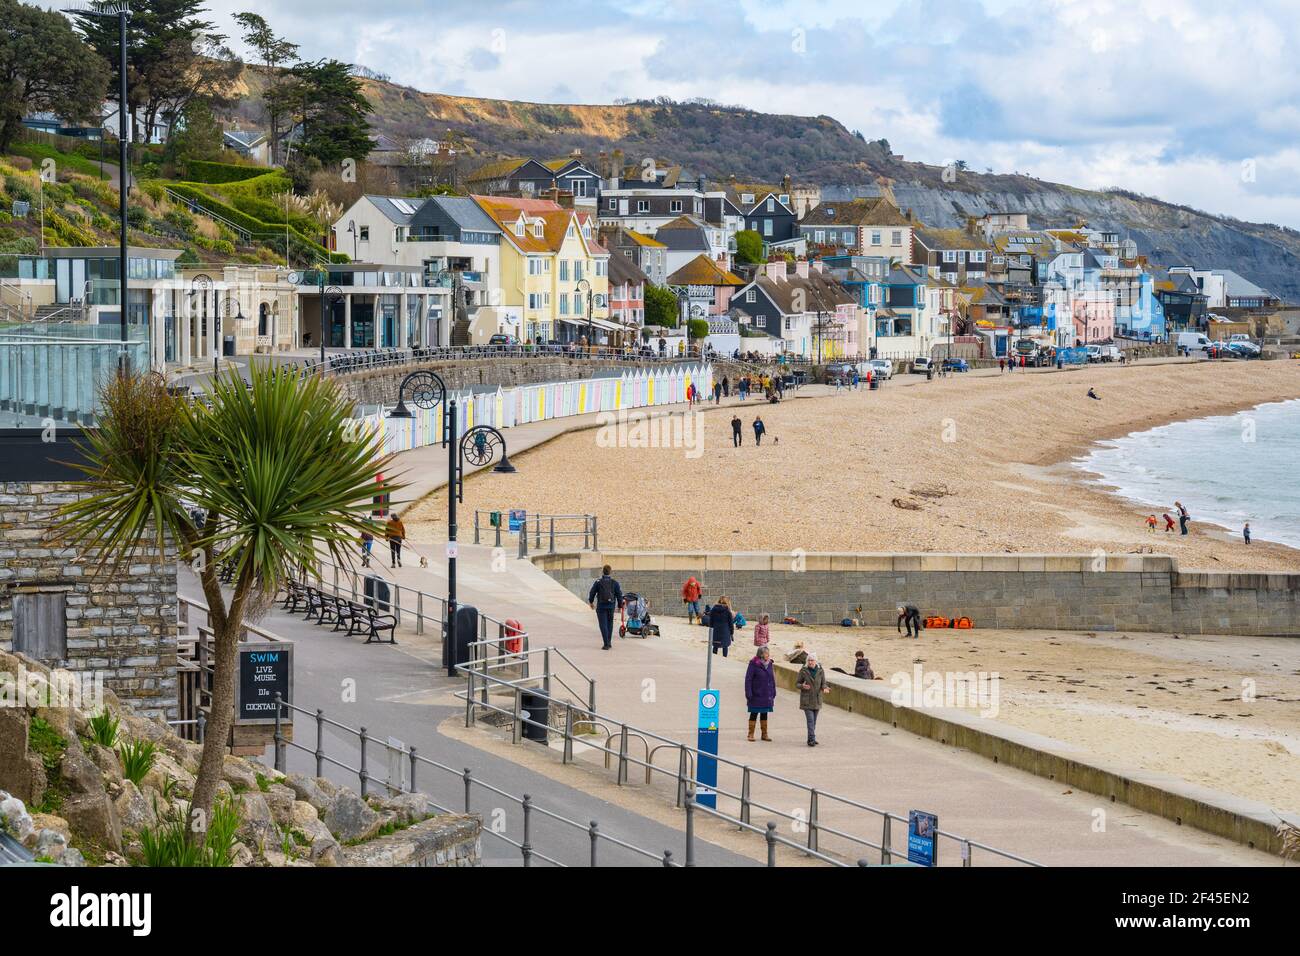 Lyme Regis, Dorset, UK. 19th Mar, 2021. UK Weather: A mixed bag of sunshine and cloud along with a chilly breeze at the seaside resort of Lyme Regis. A bracing sea breeze kept people away as unsettled conditions are forecast over the weekend Credit: Celia McMahon/Alamy Live News Stock Photo